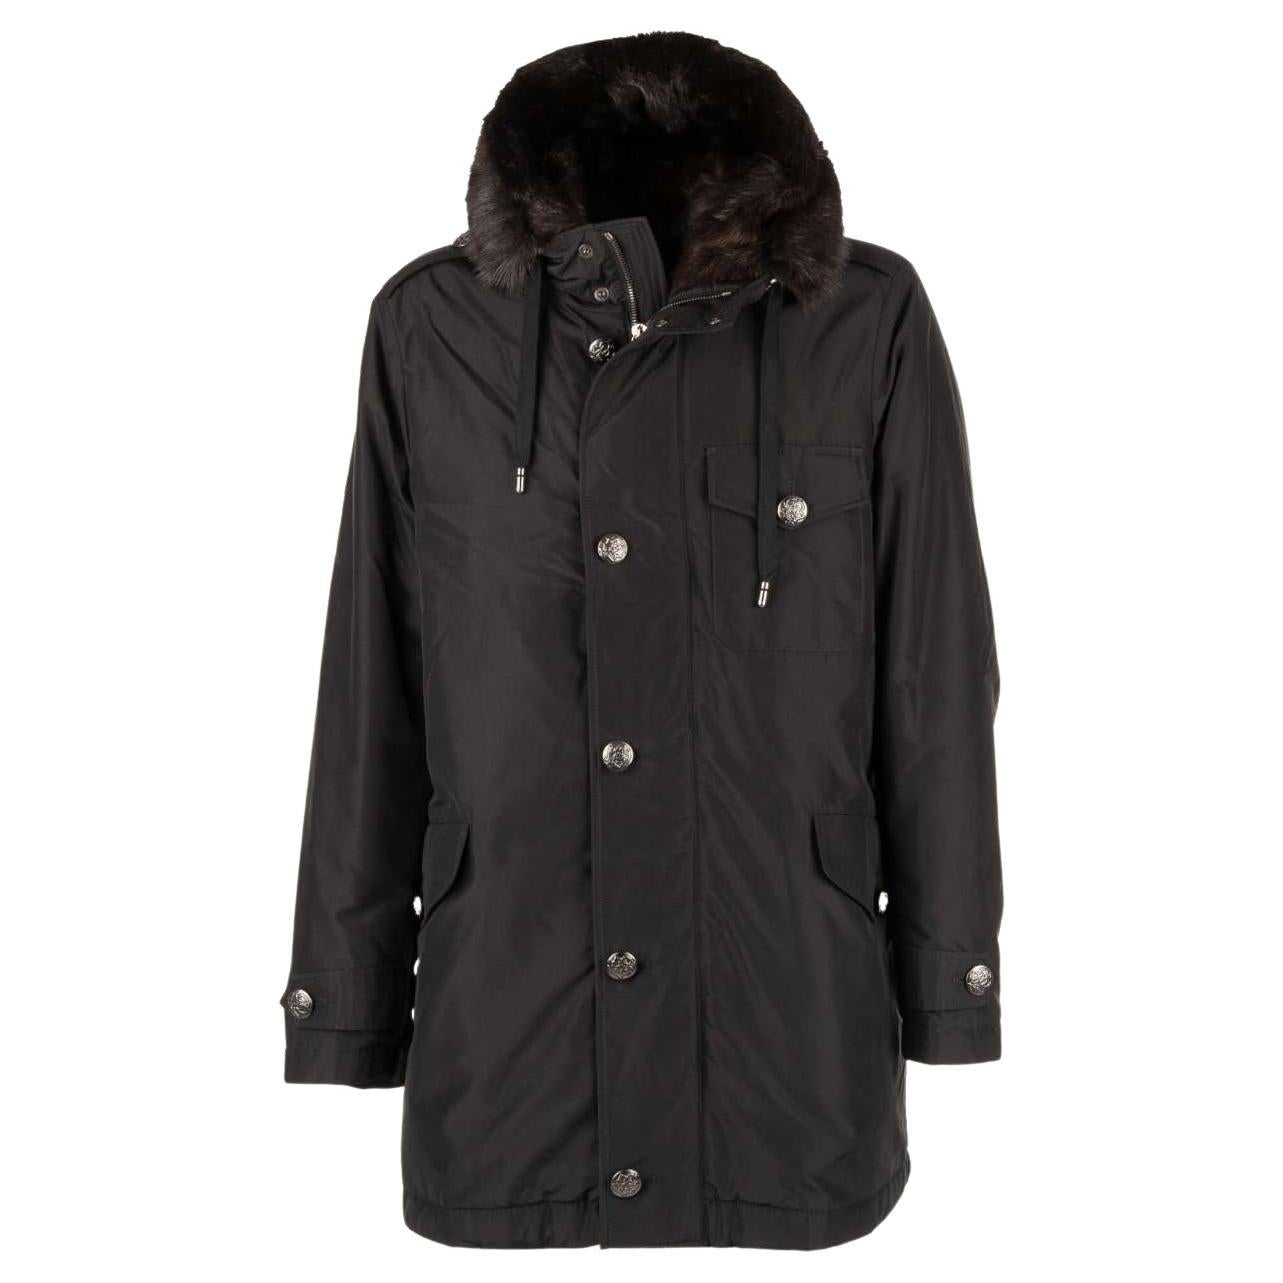 Dolce & Gabbana Silk Parka Jacket with Detachable Fur Lining and Hoody Black 50 For Sale